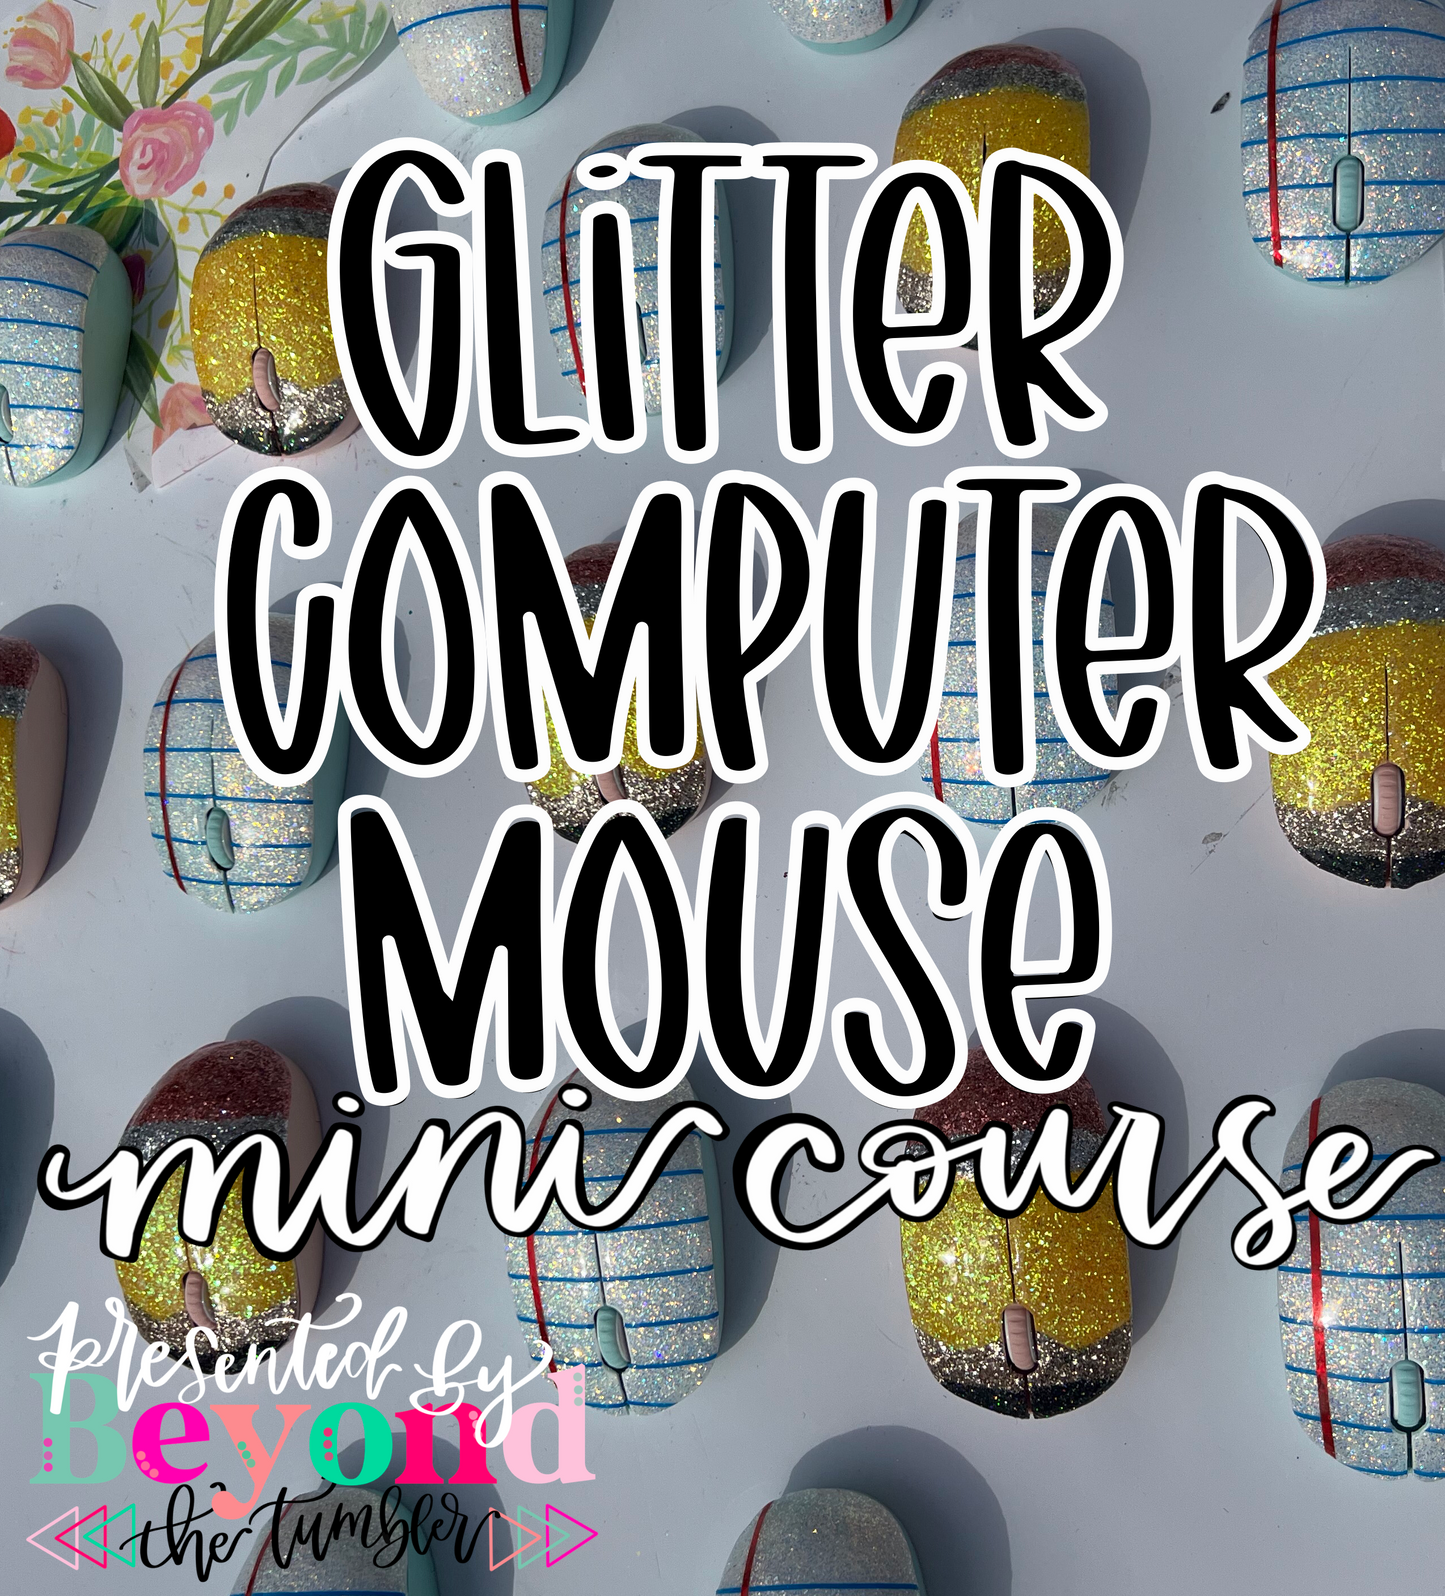 Computer Mouse UV resin Course